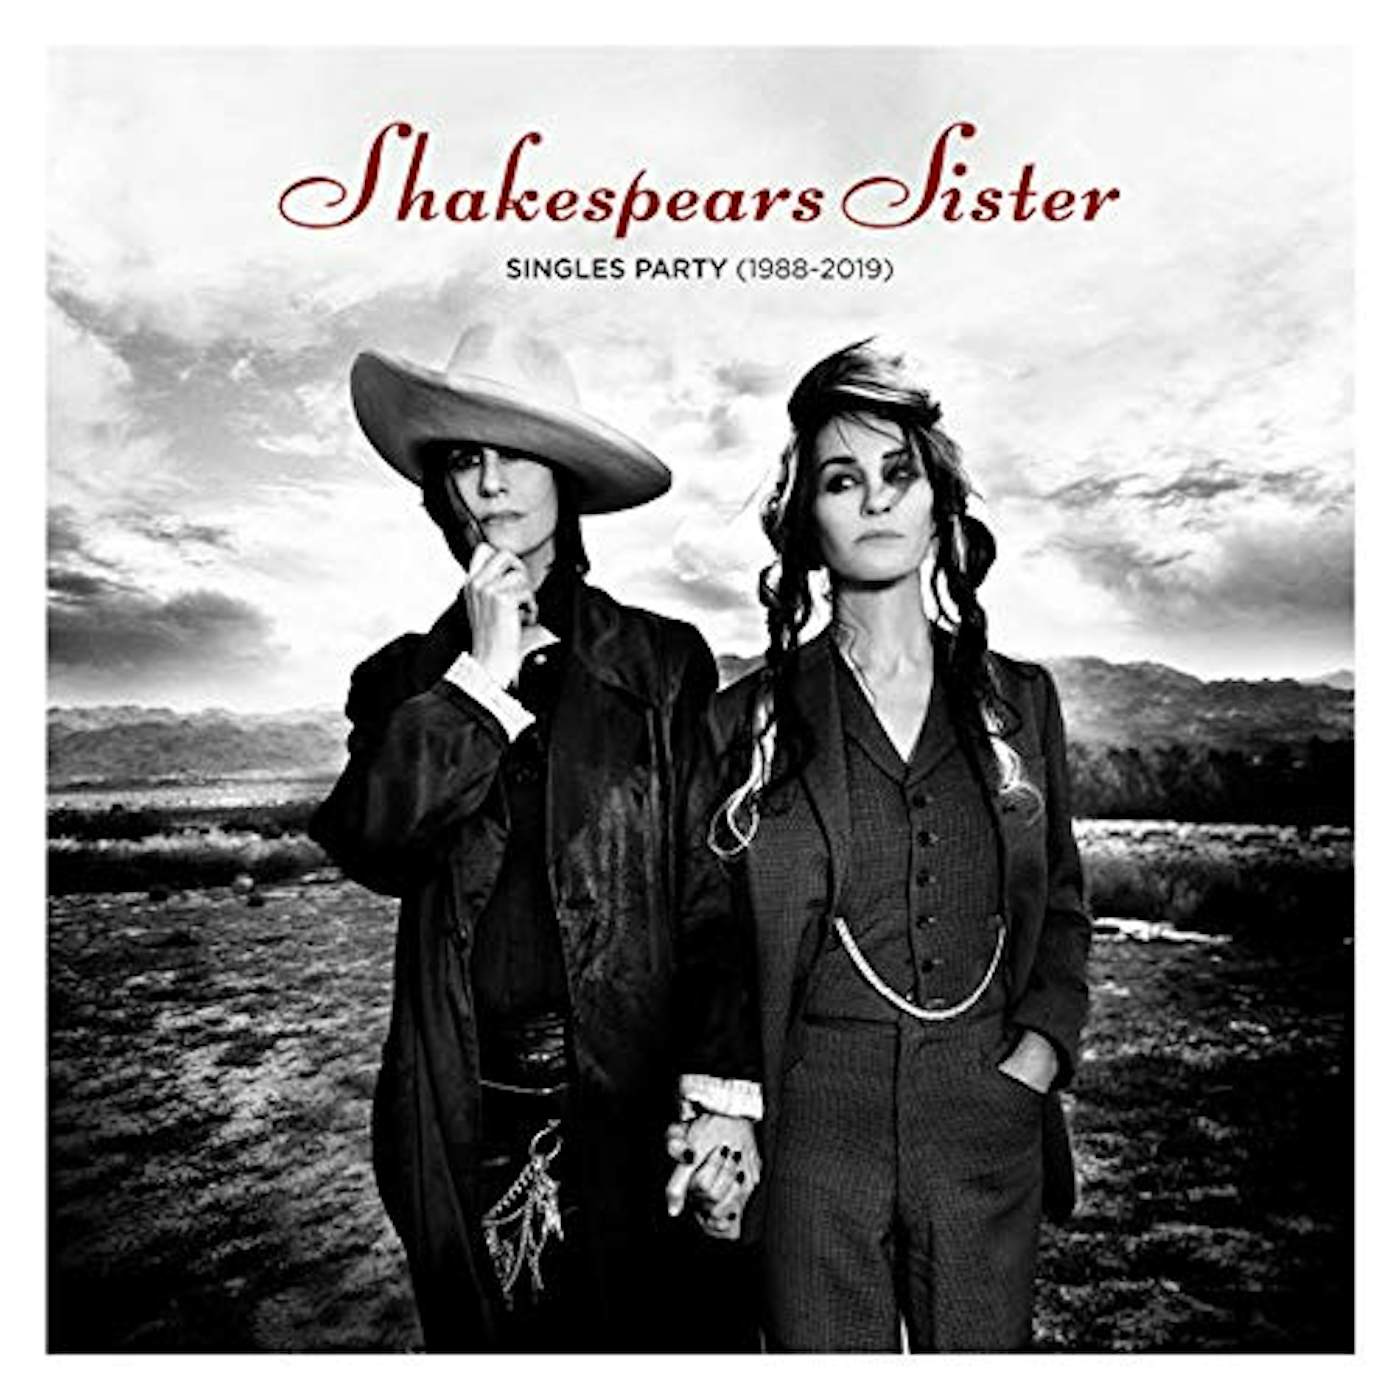 Shakespears Sister Singles Party (1988-2019) (Deluxe Edition) CD